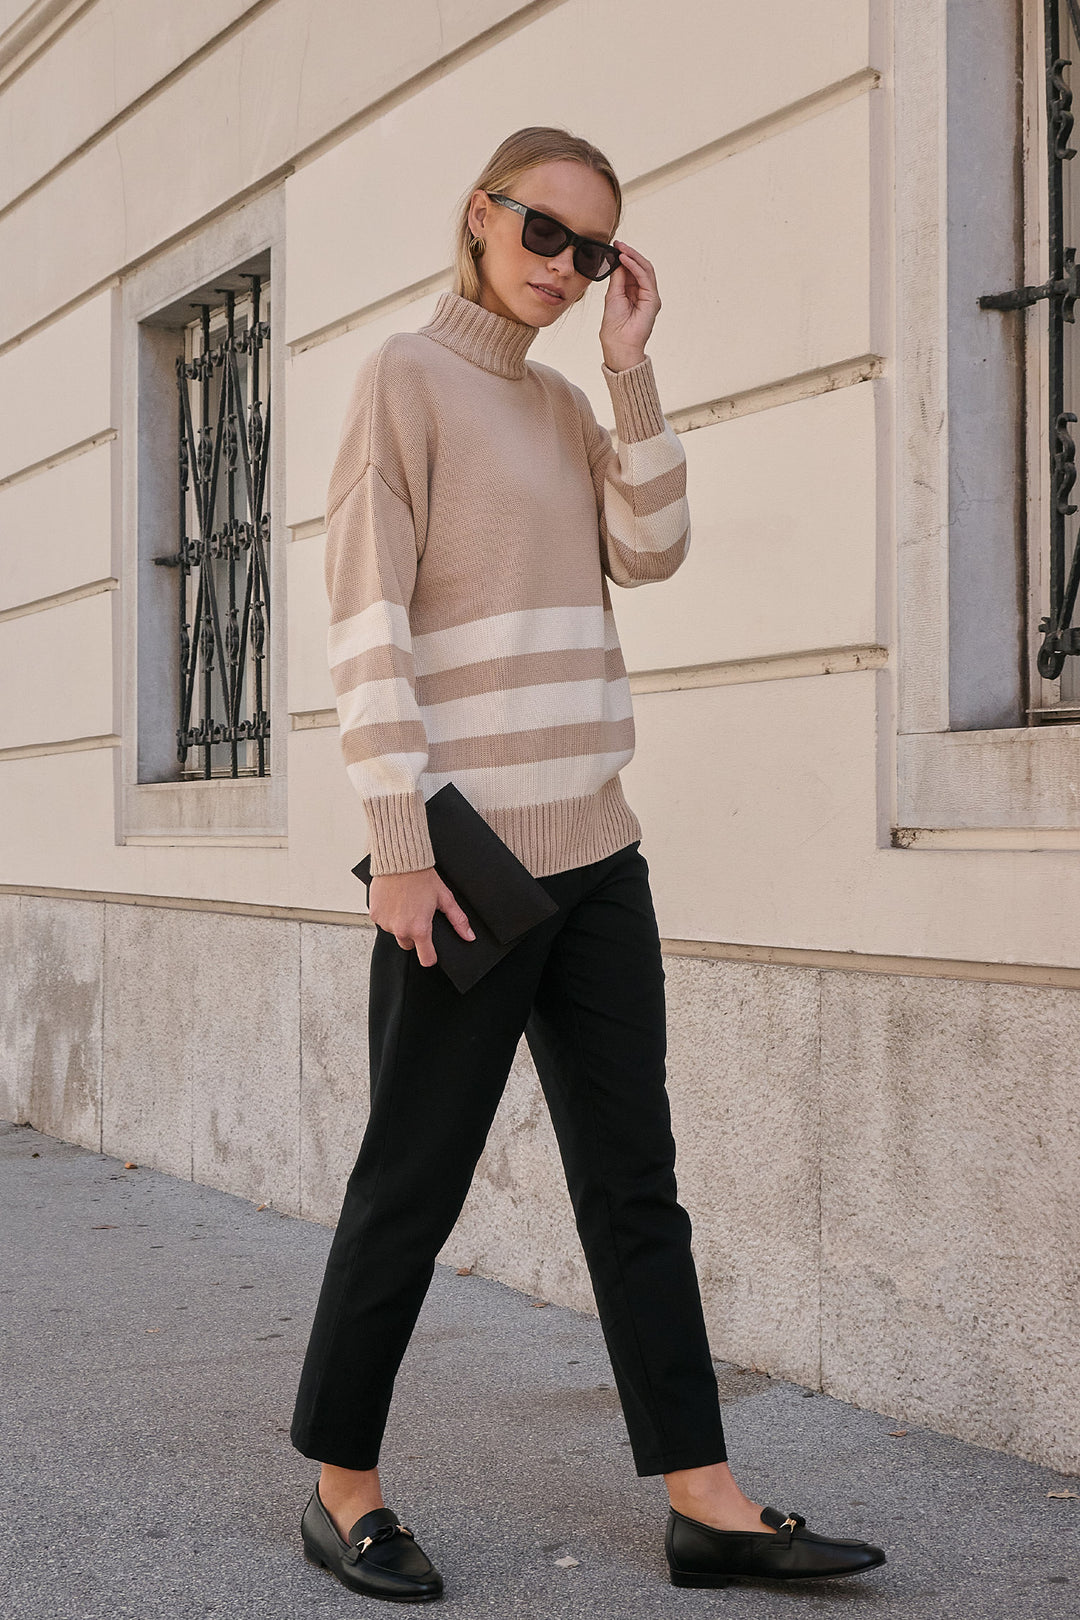 Knitted striped pullover